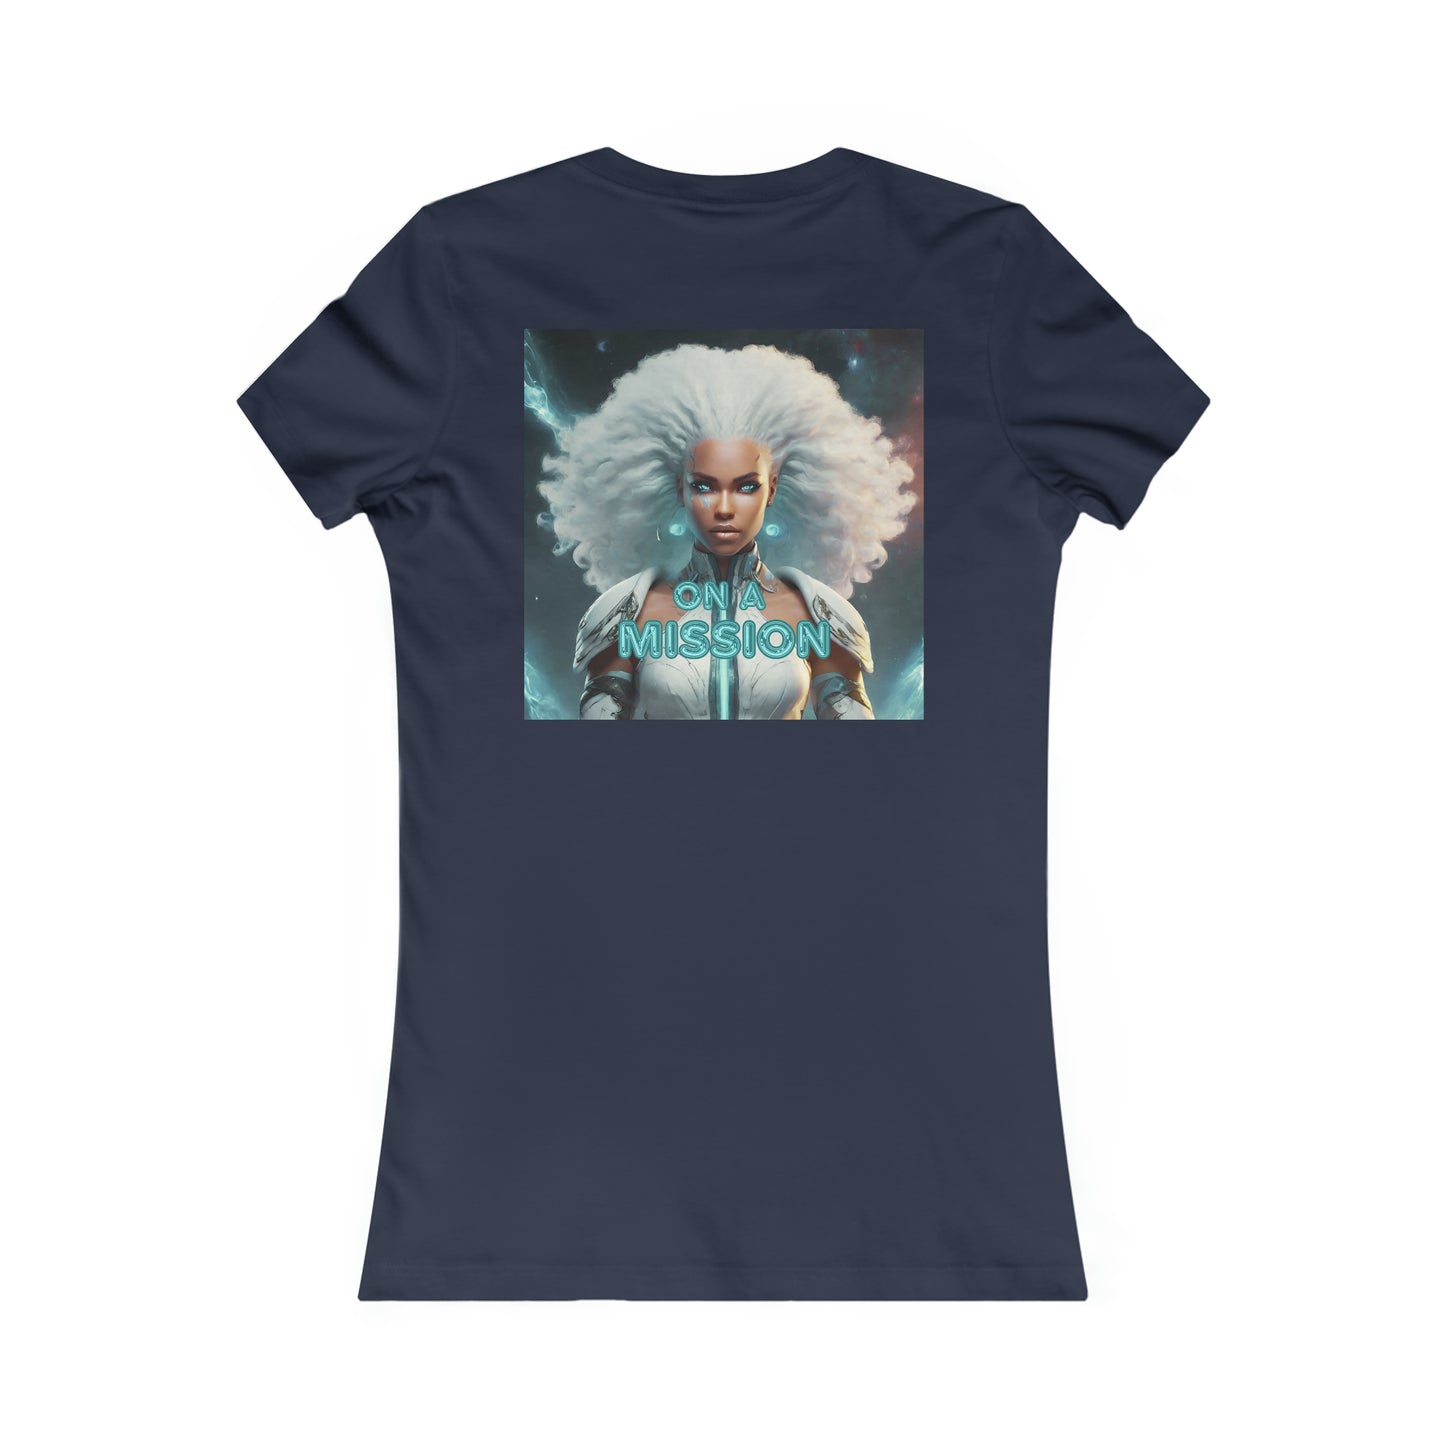 Women's Favorite "Earth Angel On a  Mission" Tee